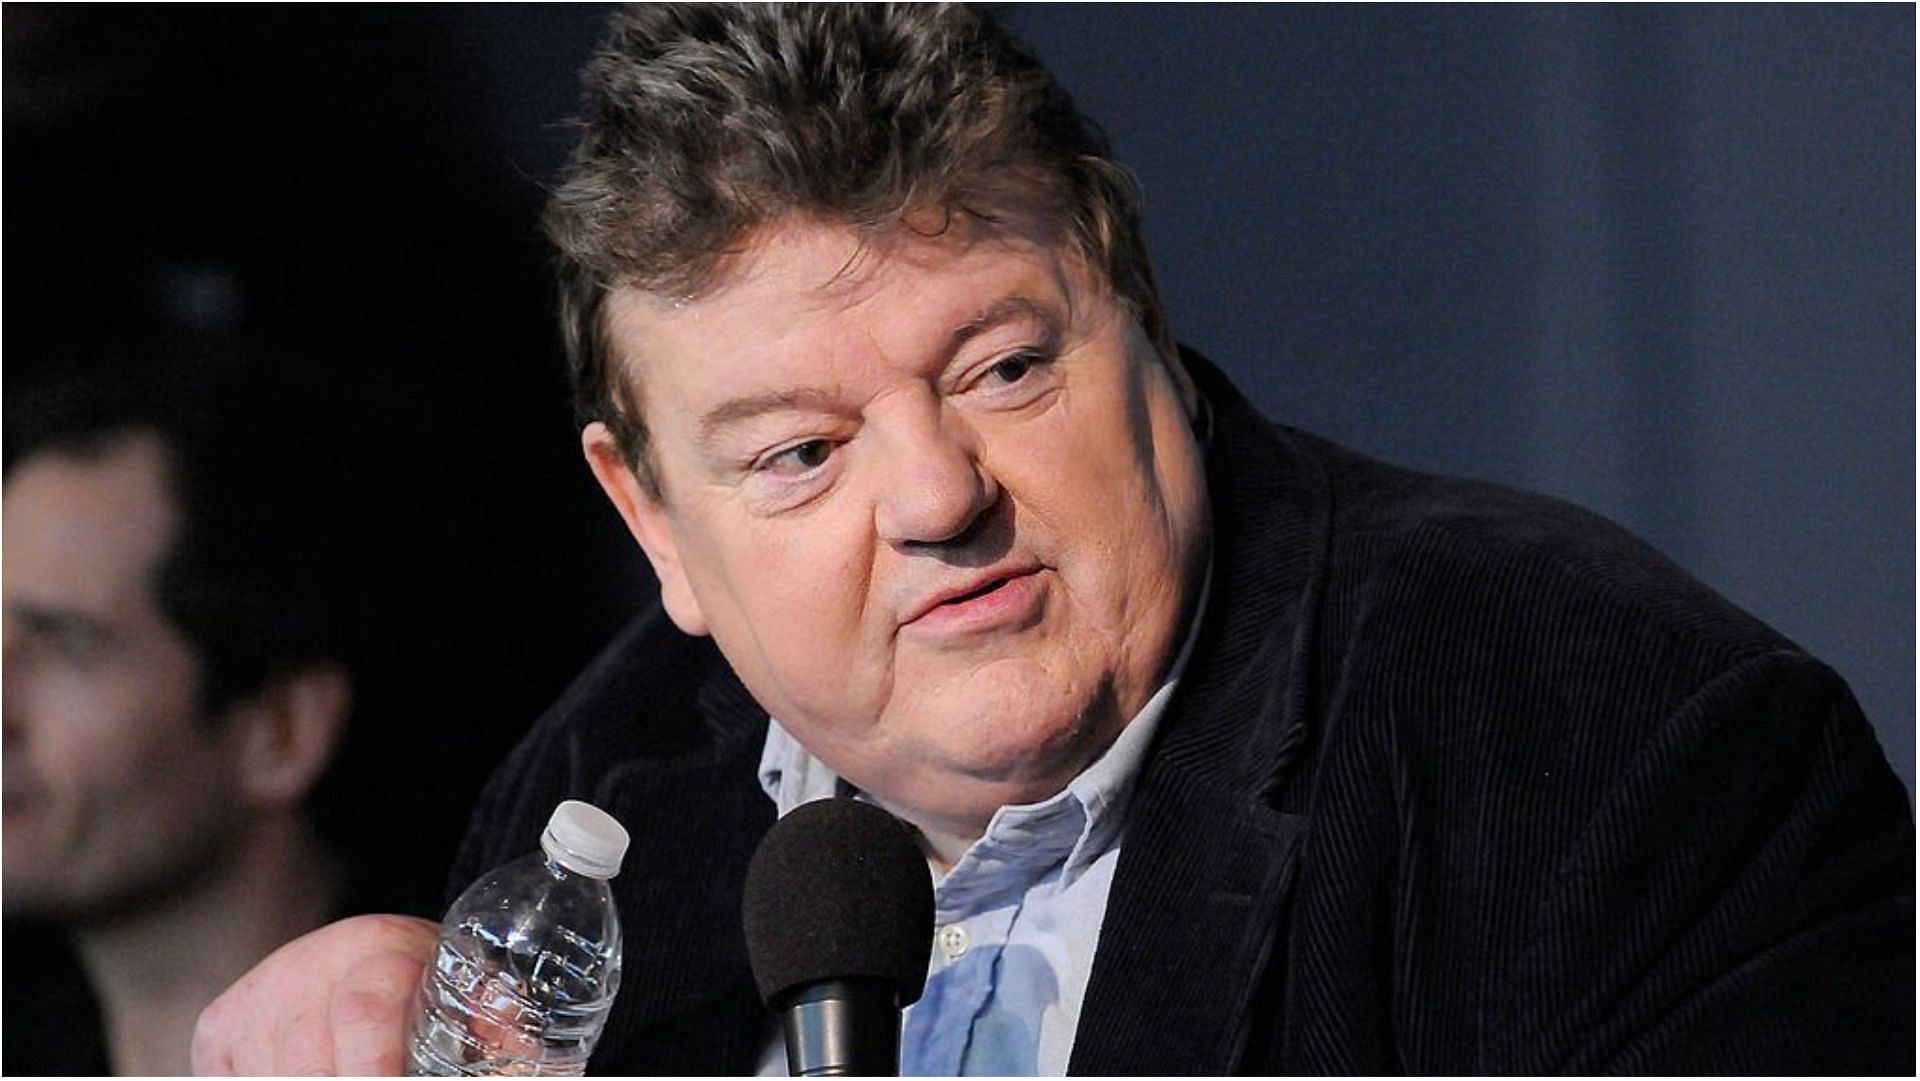 Robbie Coltrane accumulated a lot of wealth as an actor (Image via Gary Gershoff/Getty Images)